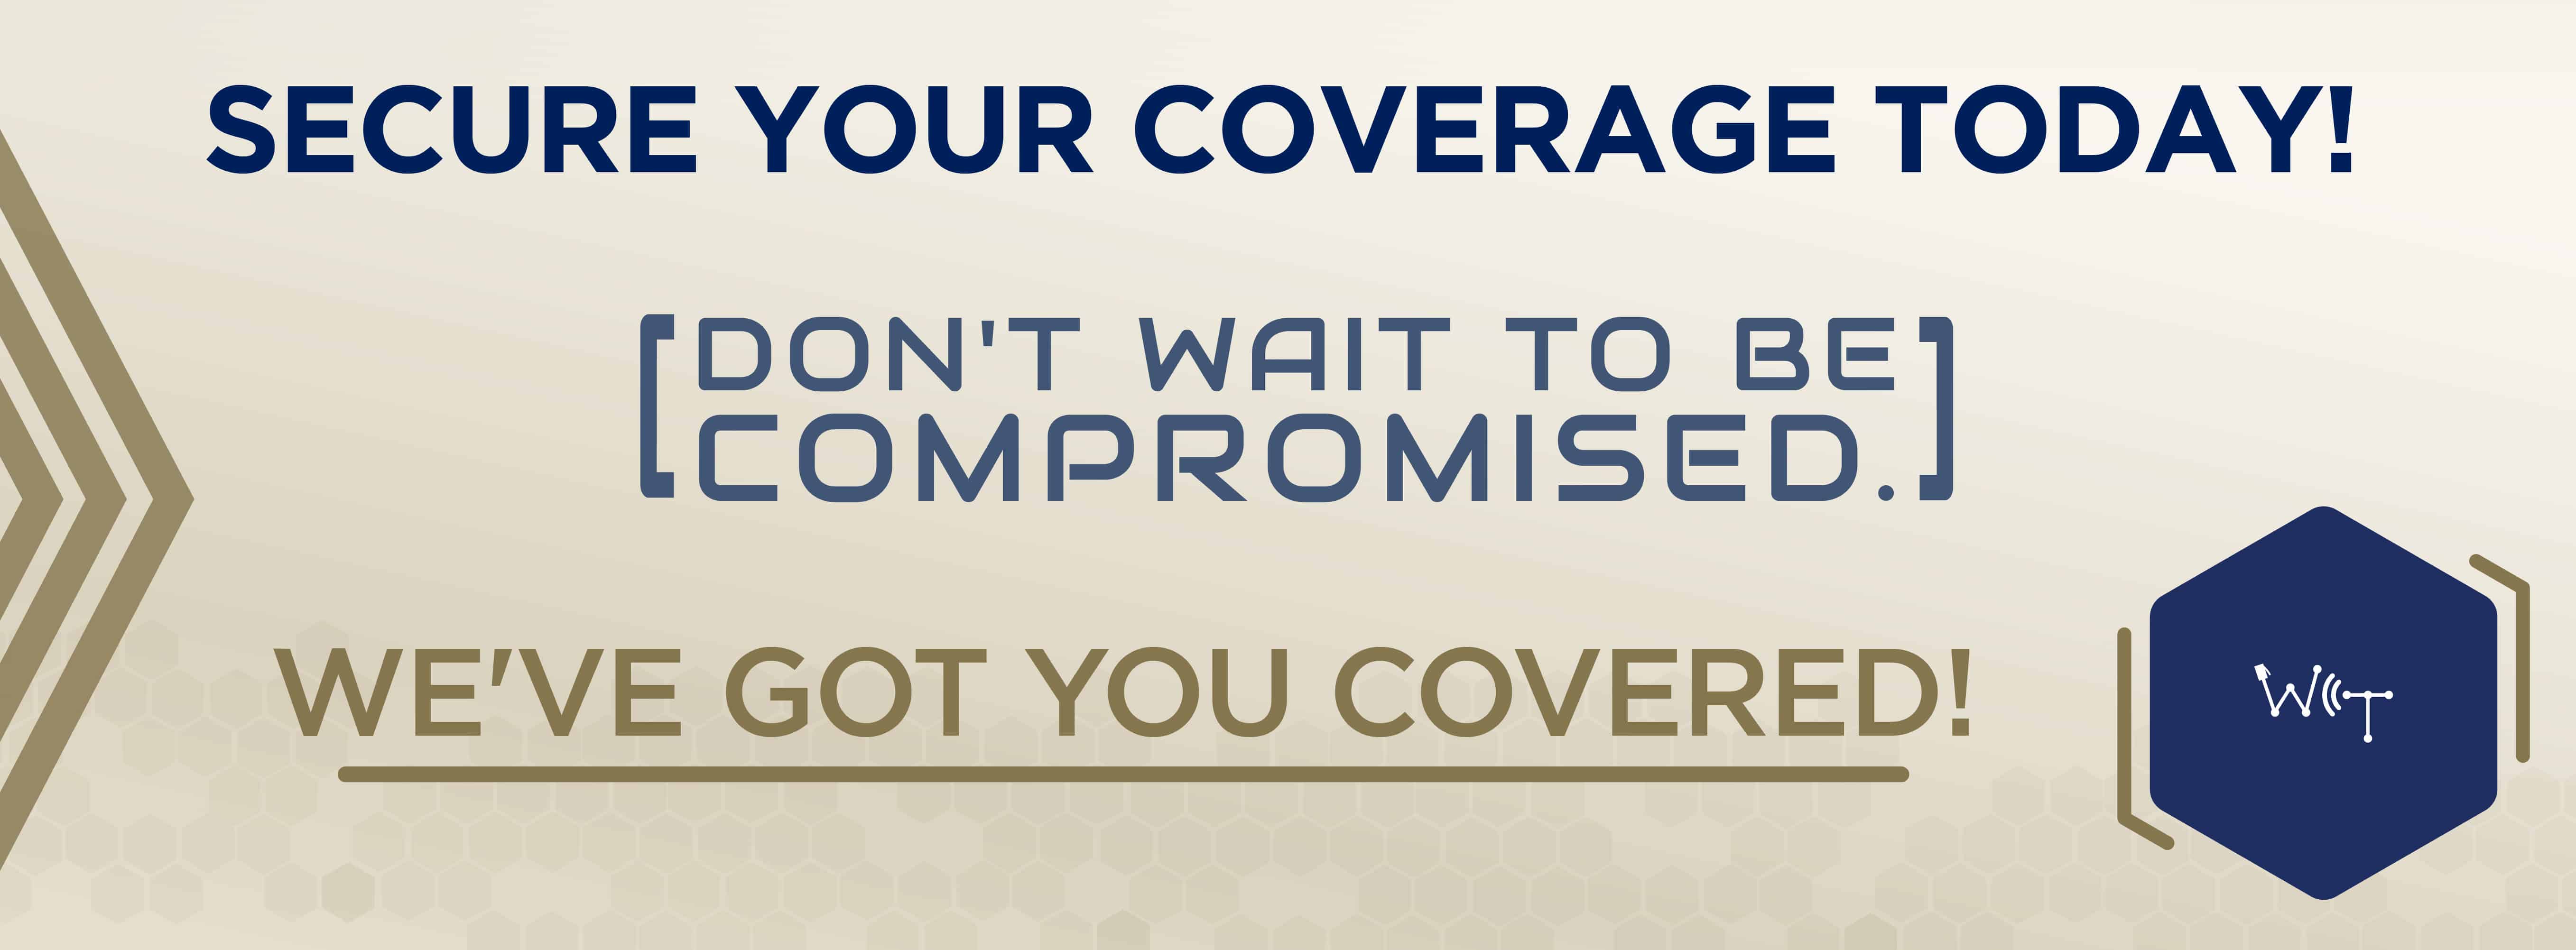 Secure your coverage today! We've got you covered!